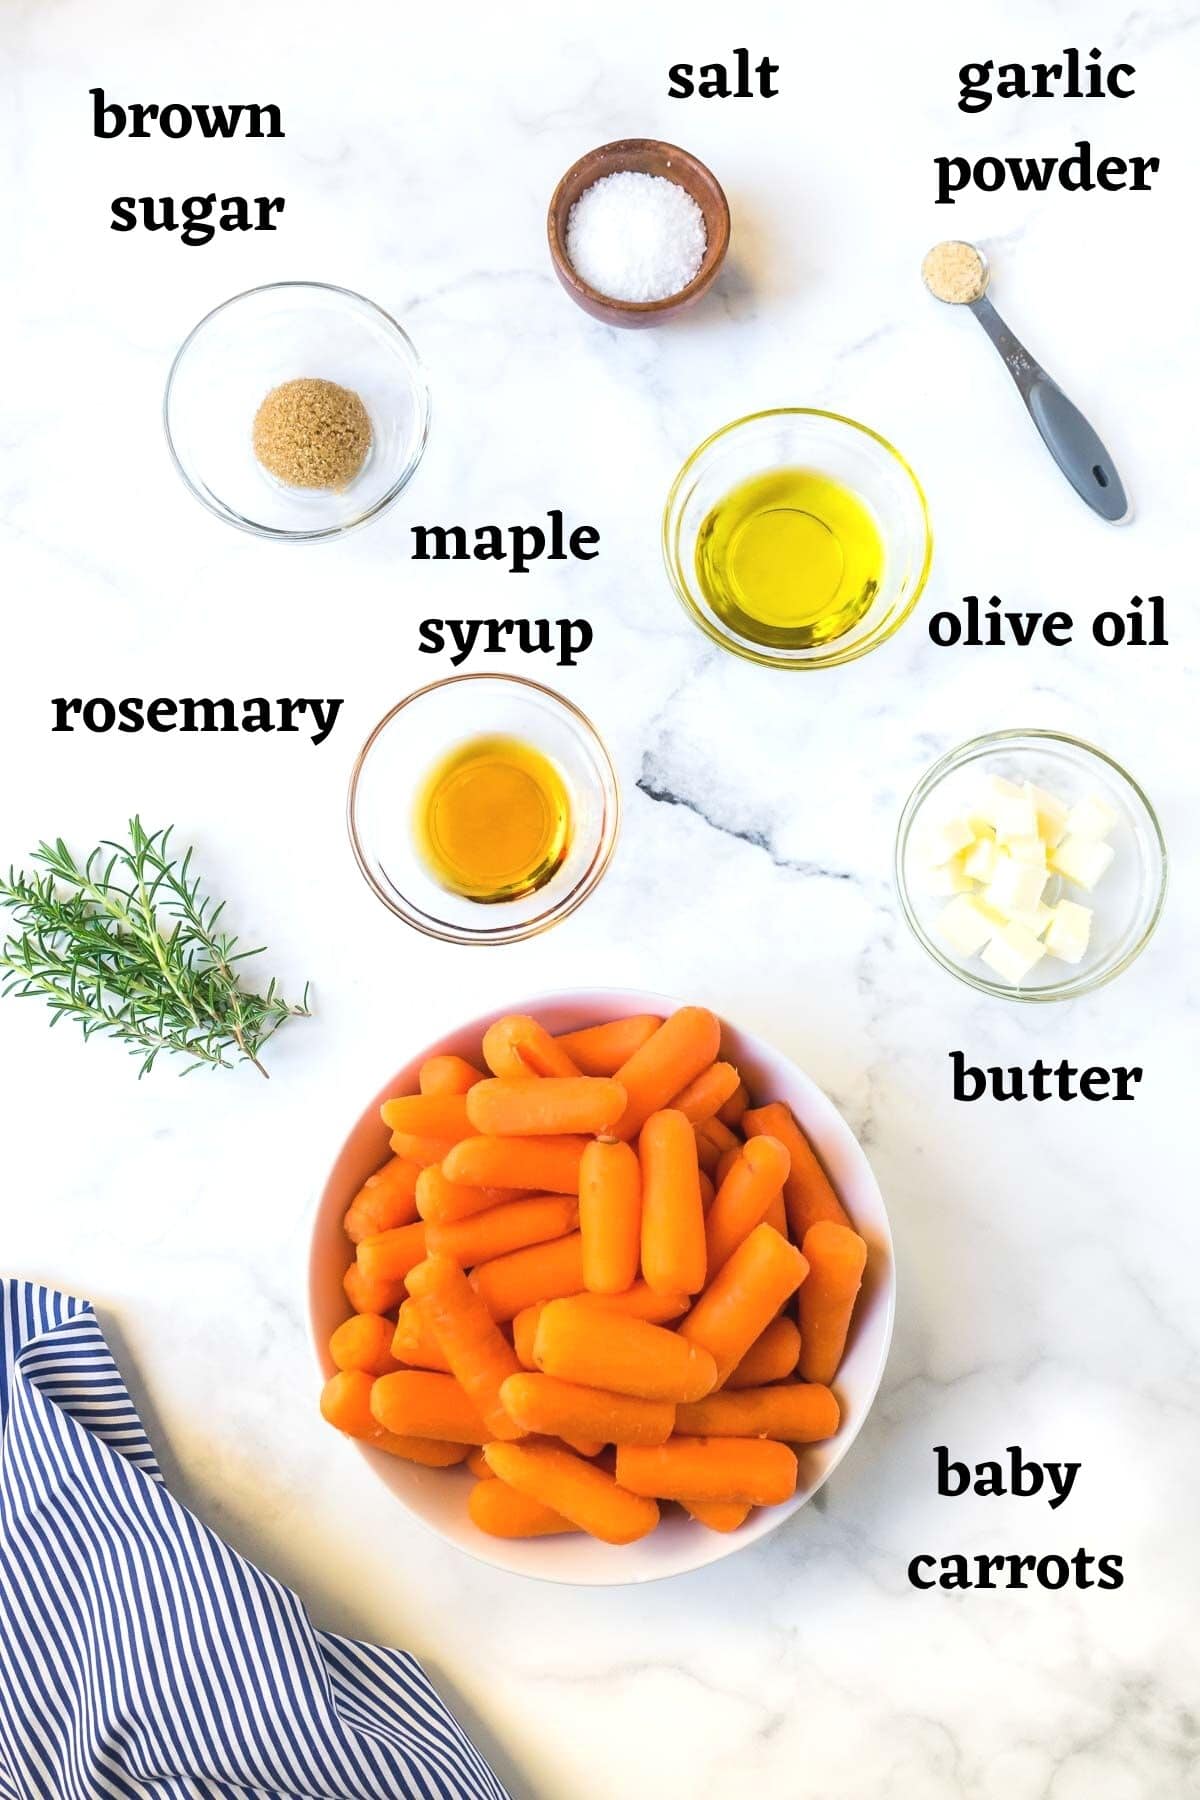 ingredients needed to make air fryer roasted baby carrots.